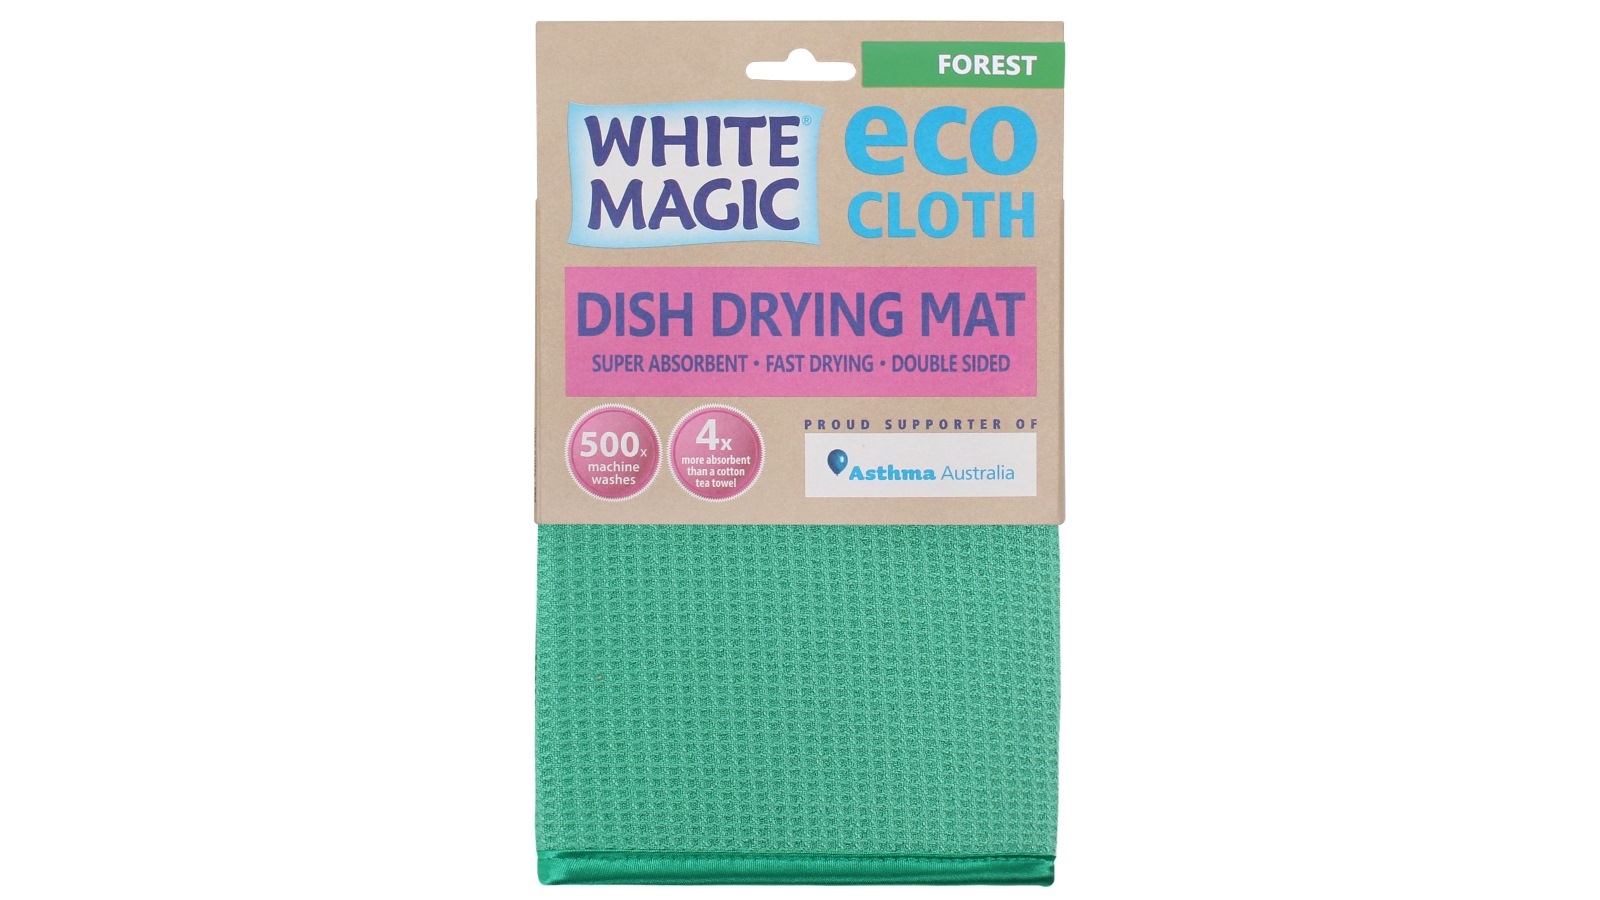 White Magic Eco Cloth Dish Drying Mat Forest